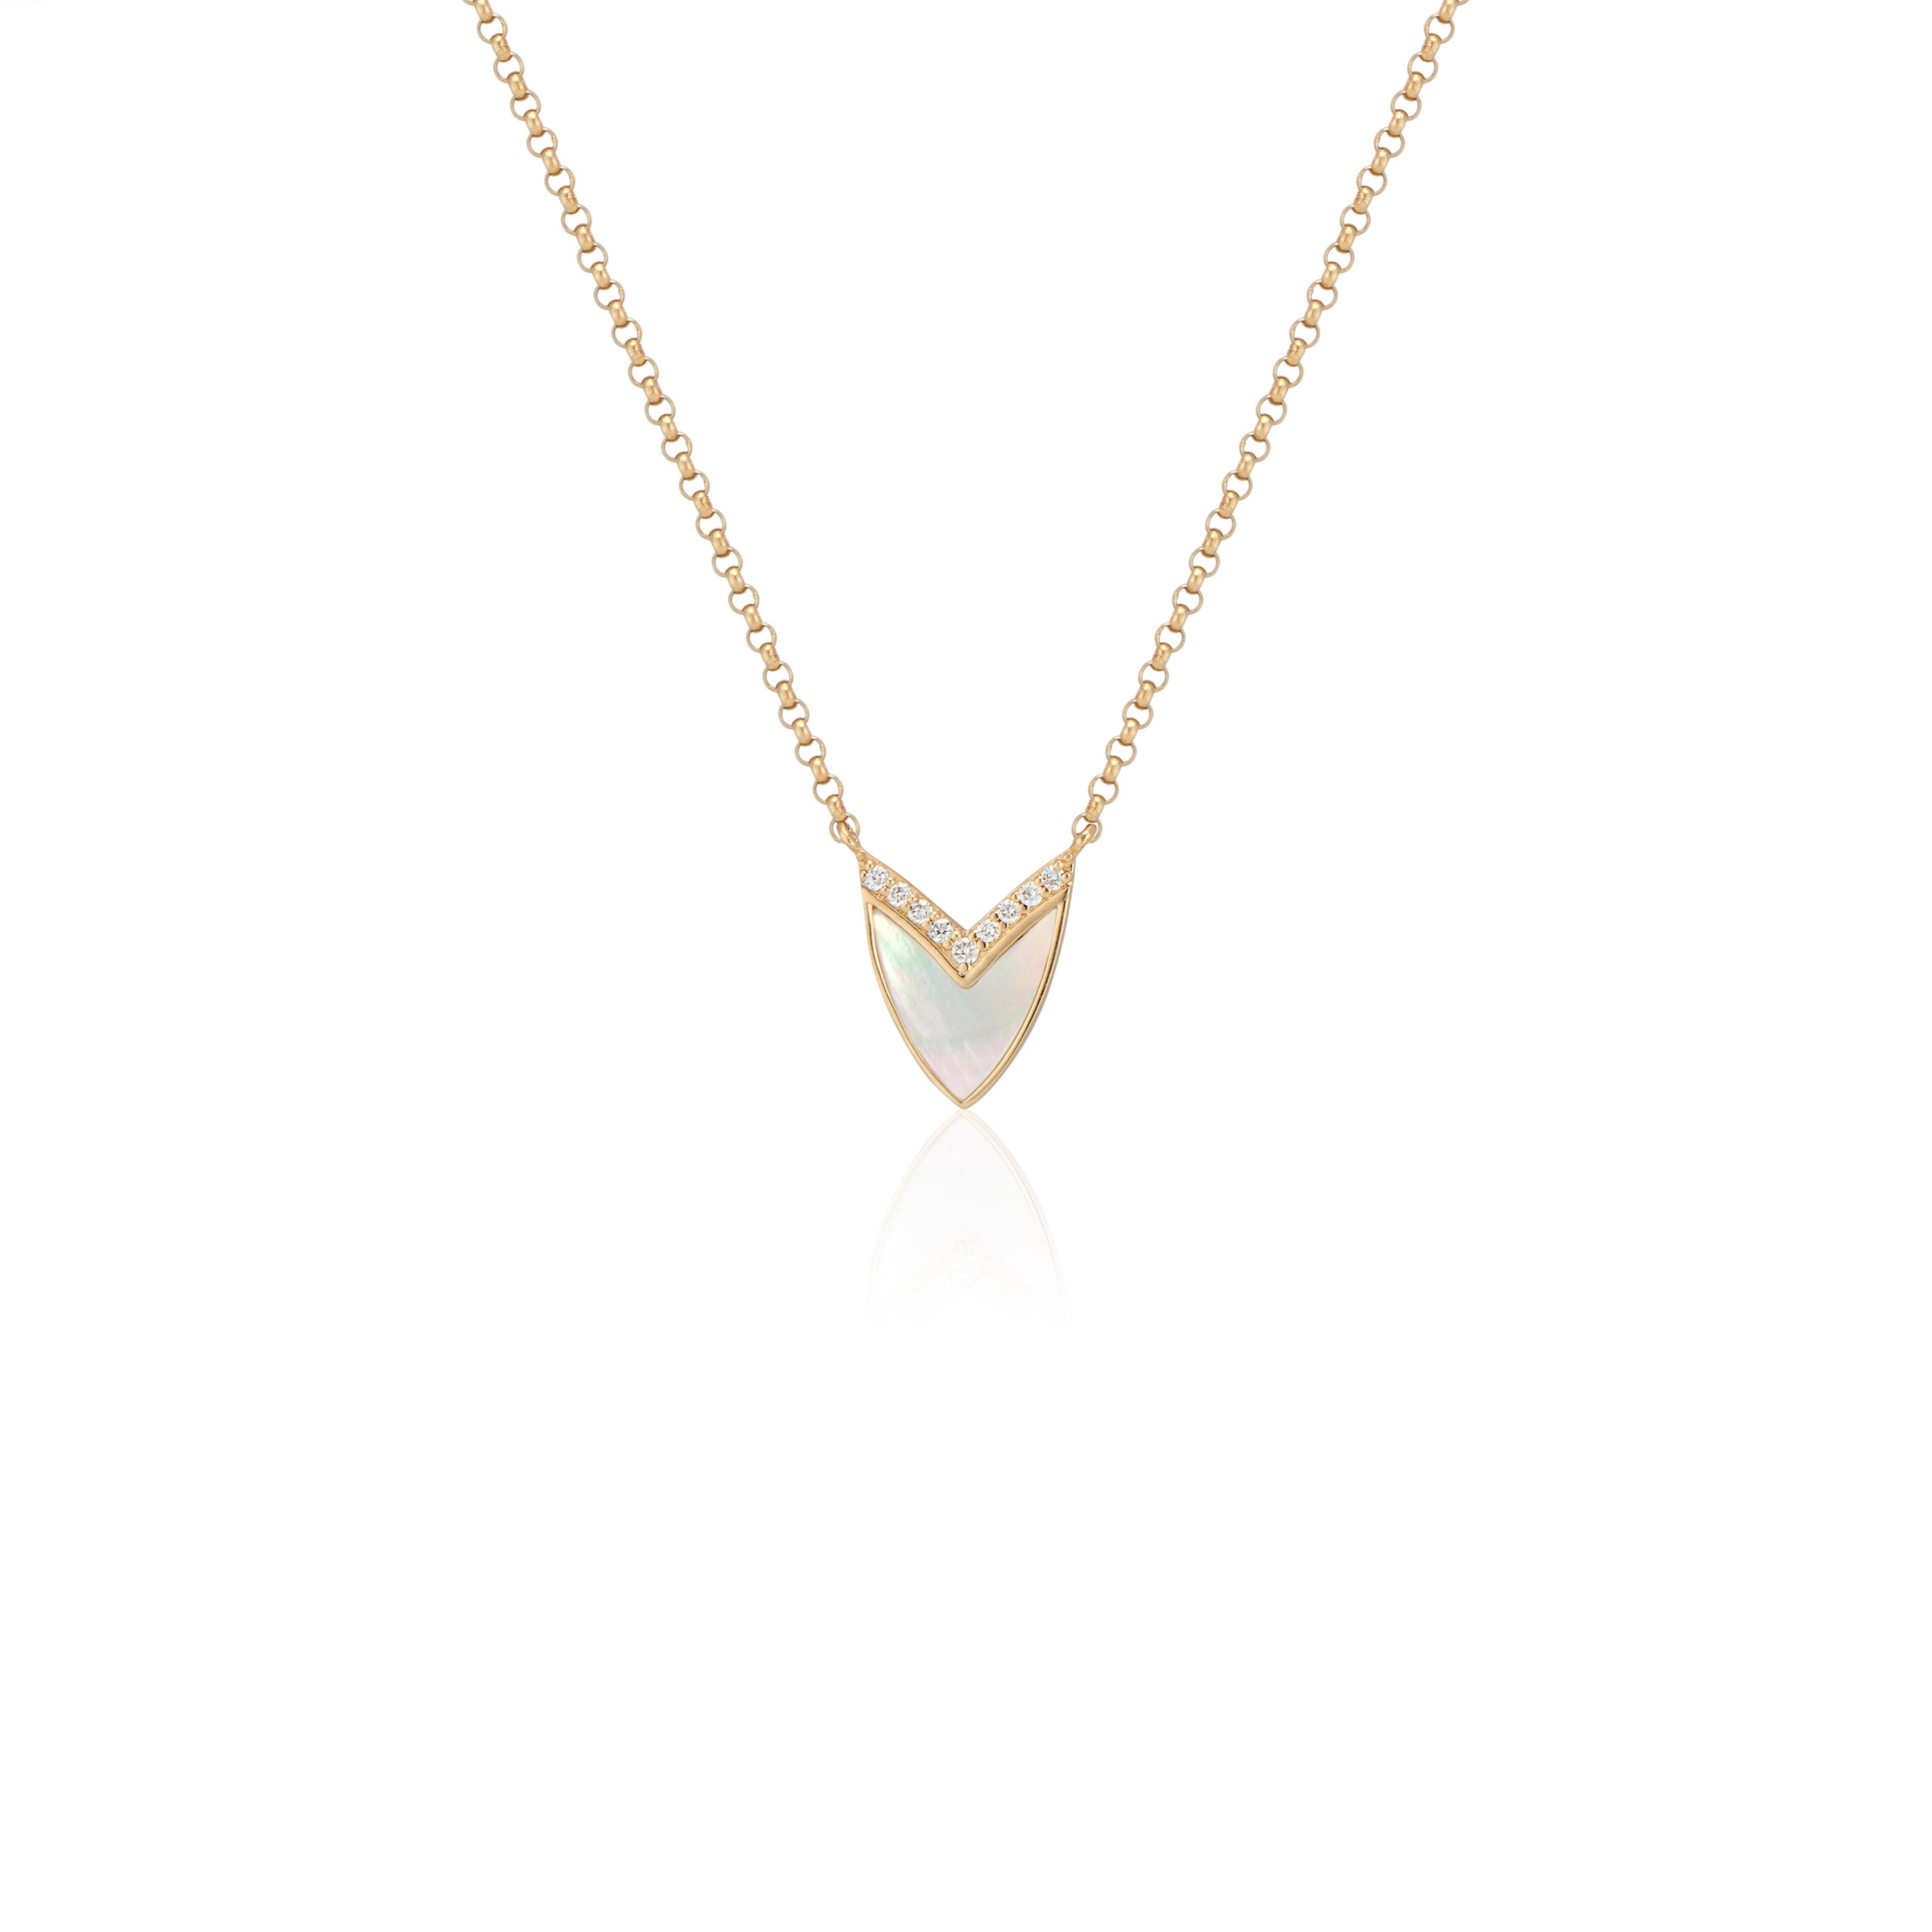 Subtly elegant, Ri Noor’sCubist Heart Necklace with Mother of Pearl, Ruby, and Diamonds adds a refined sophistication to any outfit. The pendant takes inspiration from the shape of a heart, abstracting it to a geometric form complete with an angled